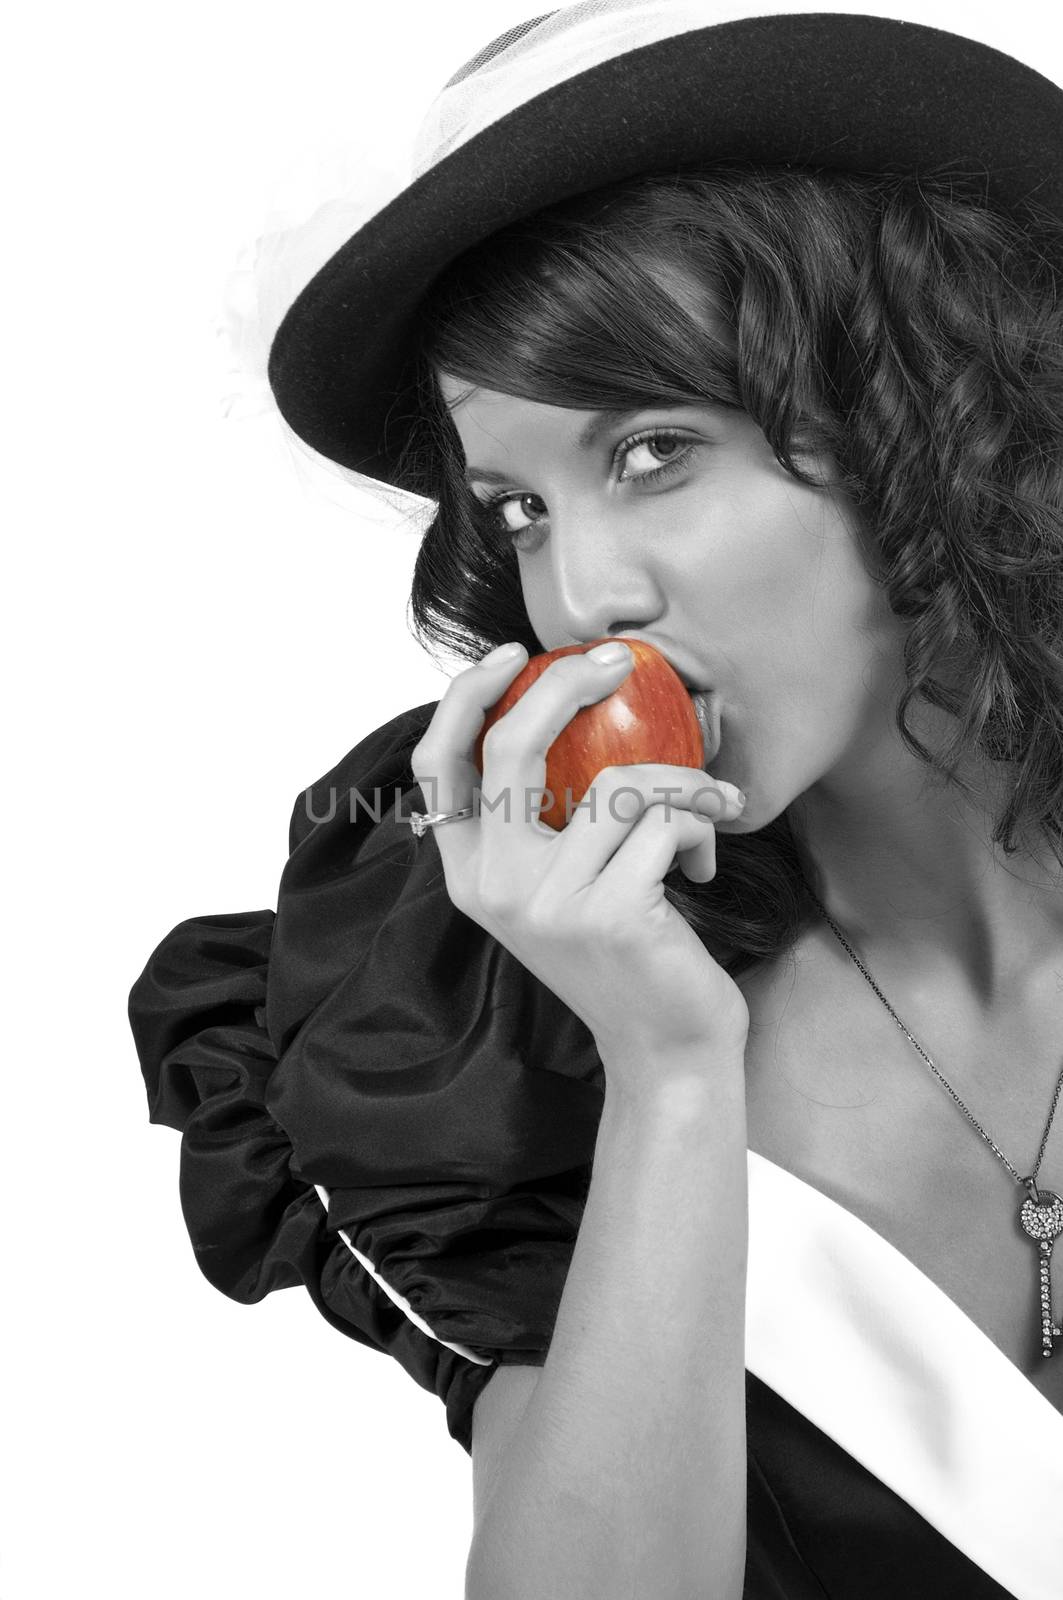 Pretty young woman taking a bite from a red apple. Black and White image with a Red apple.